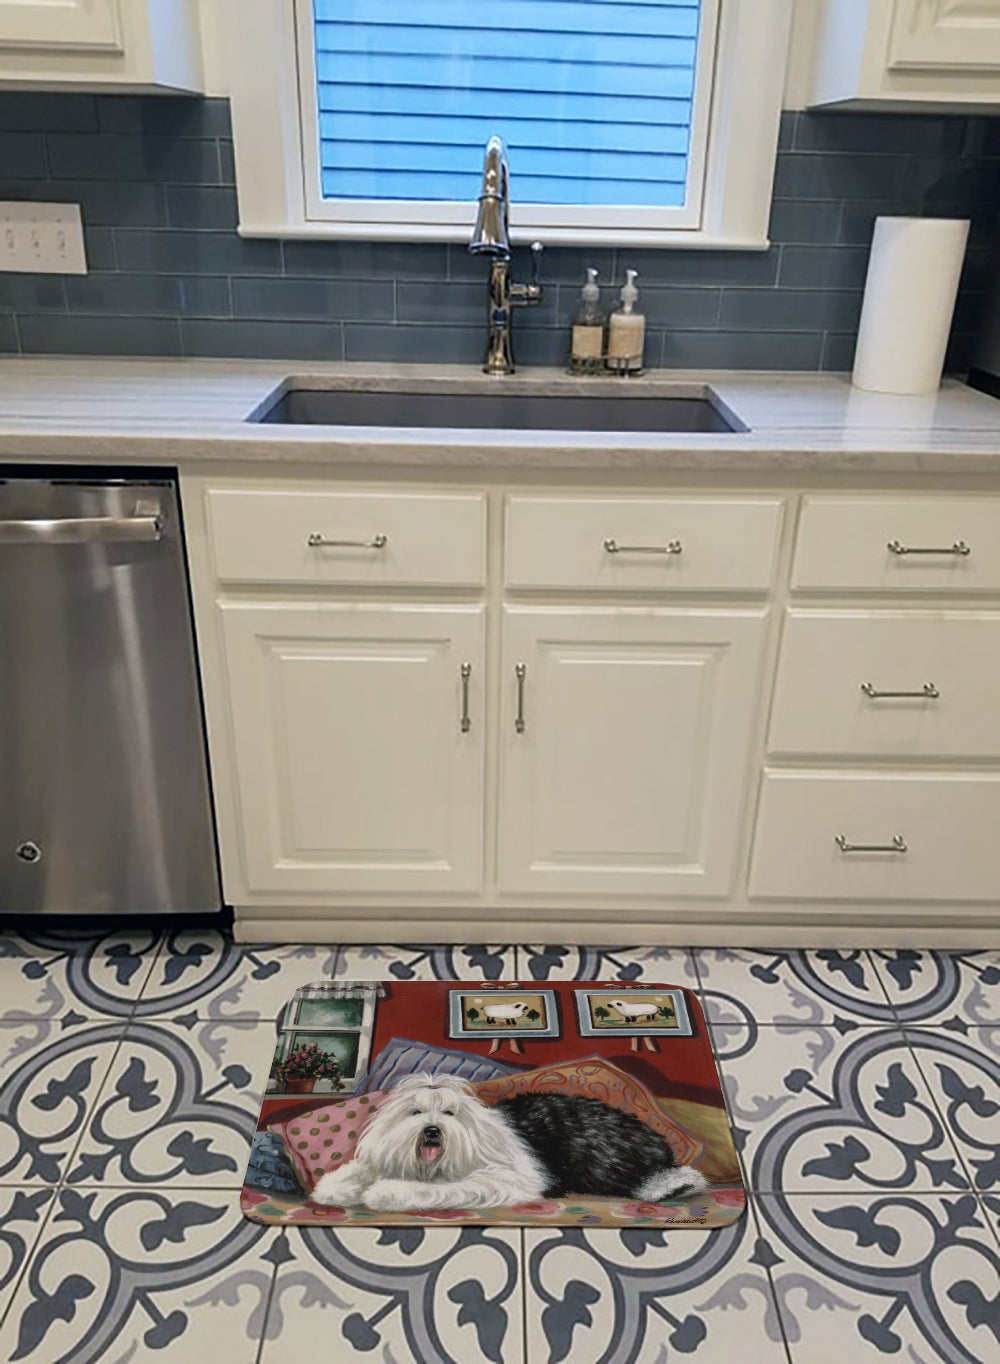 Old English Sheepdog Sweet Dreams Machine Washable Memory Foam Mat PPP3266RUG - the-store.com